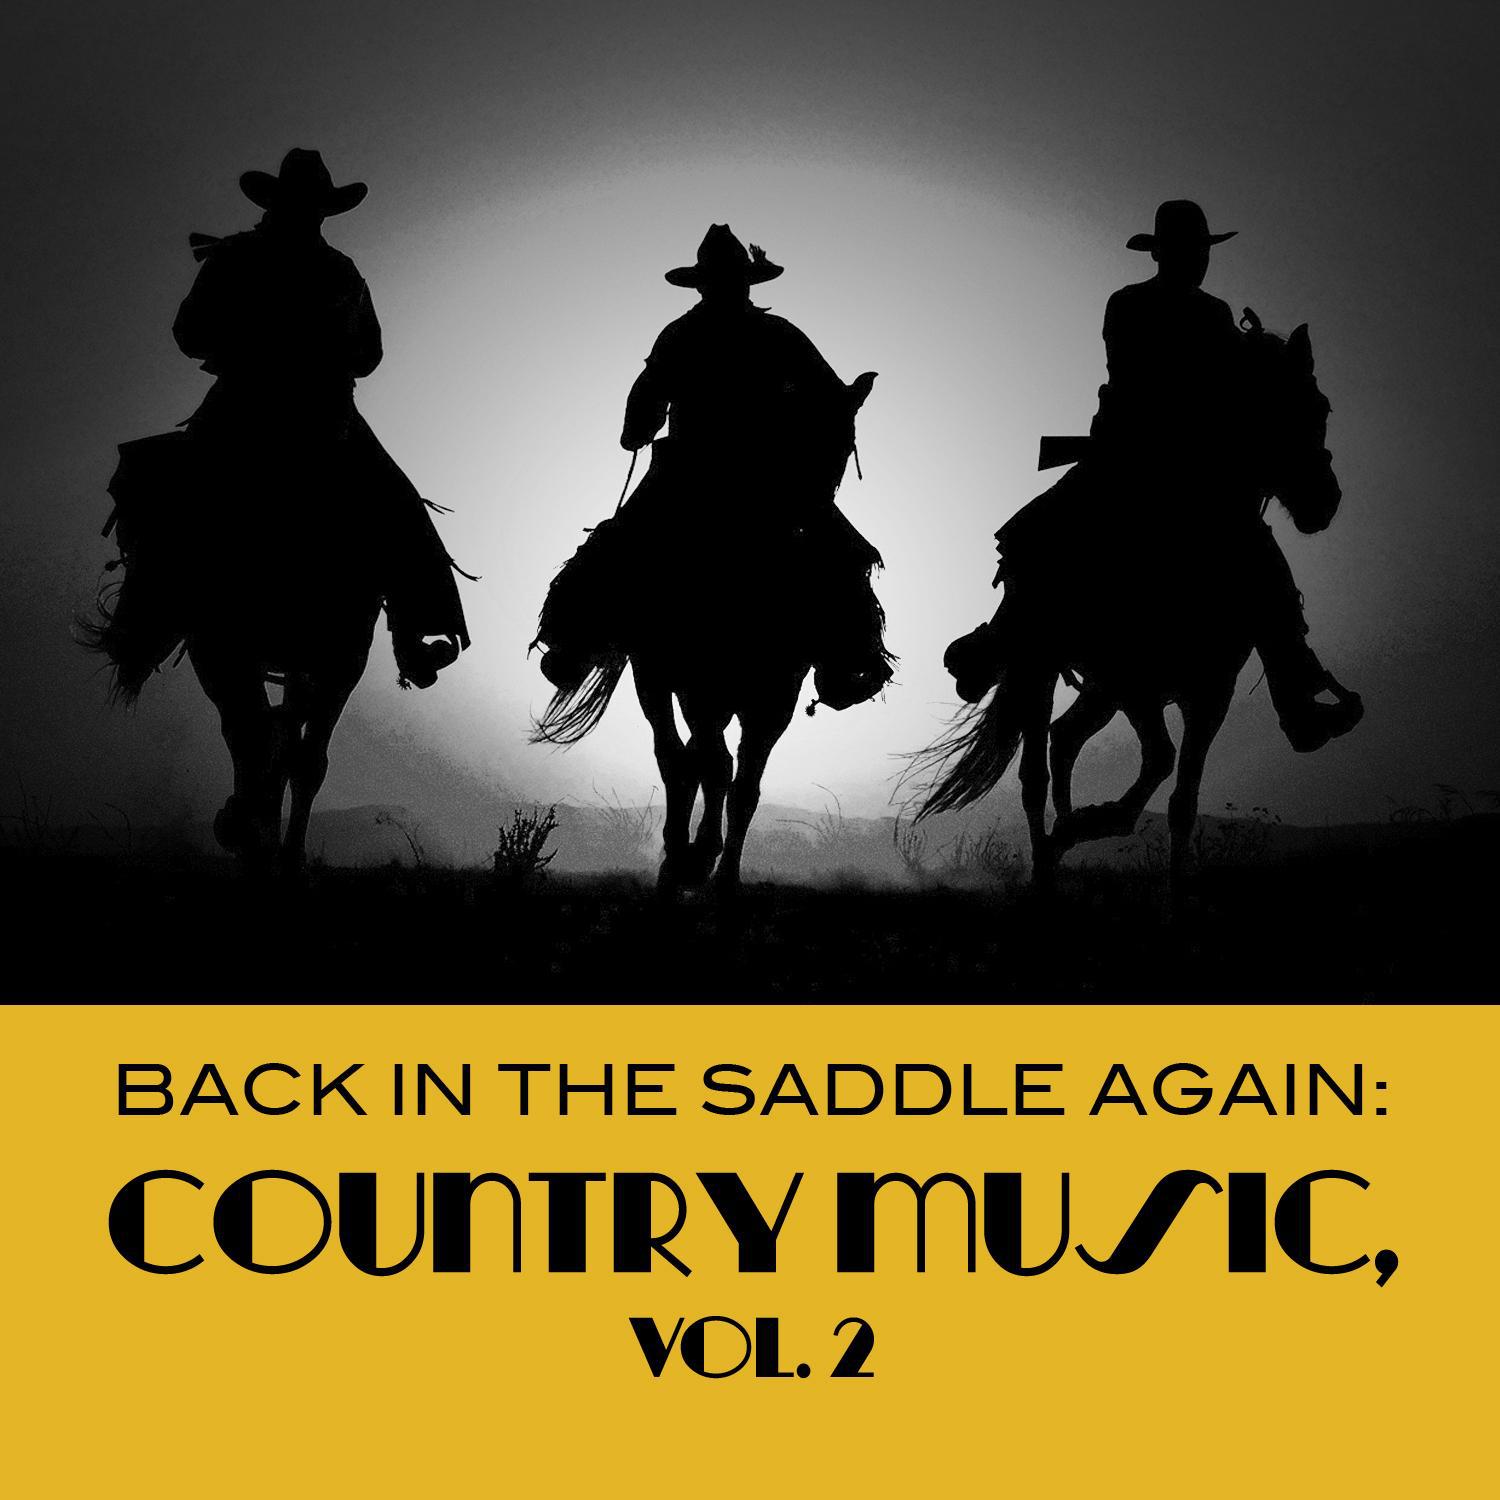 Back in the Saddle Again: Country Music, Vol. 2